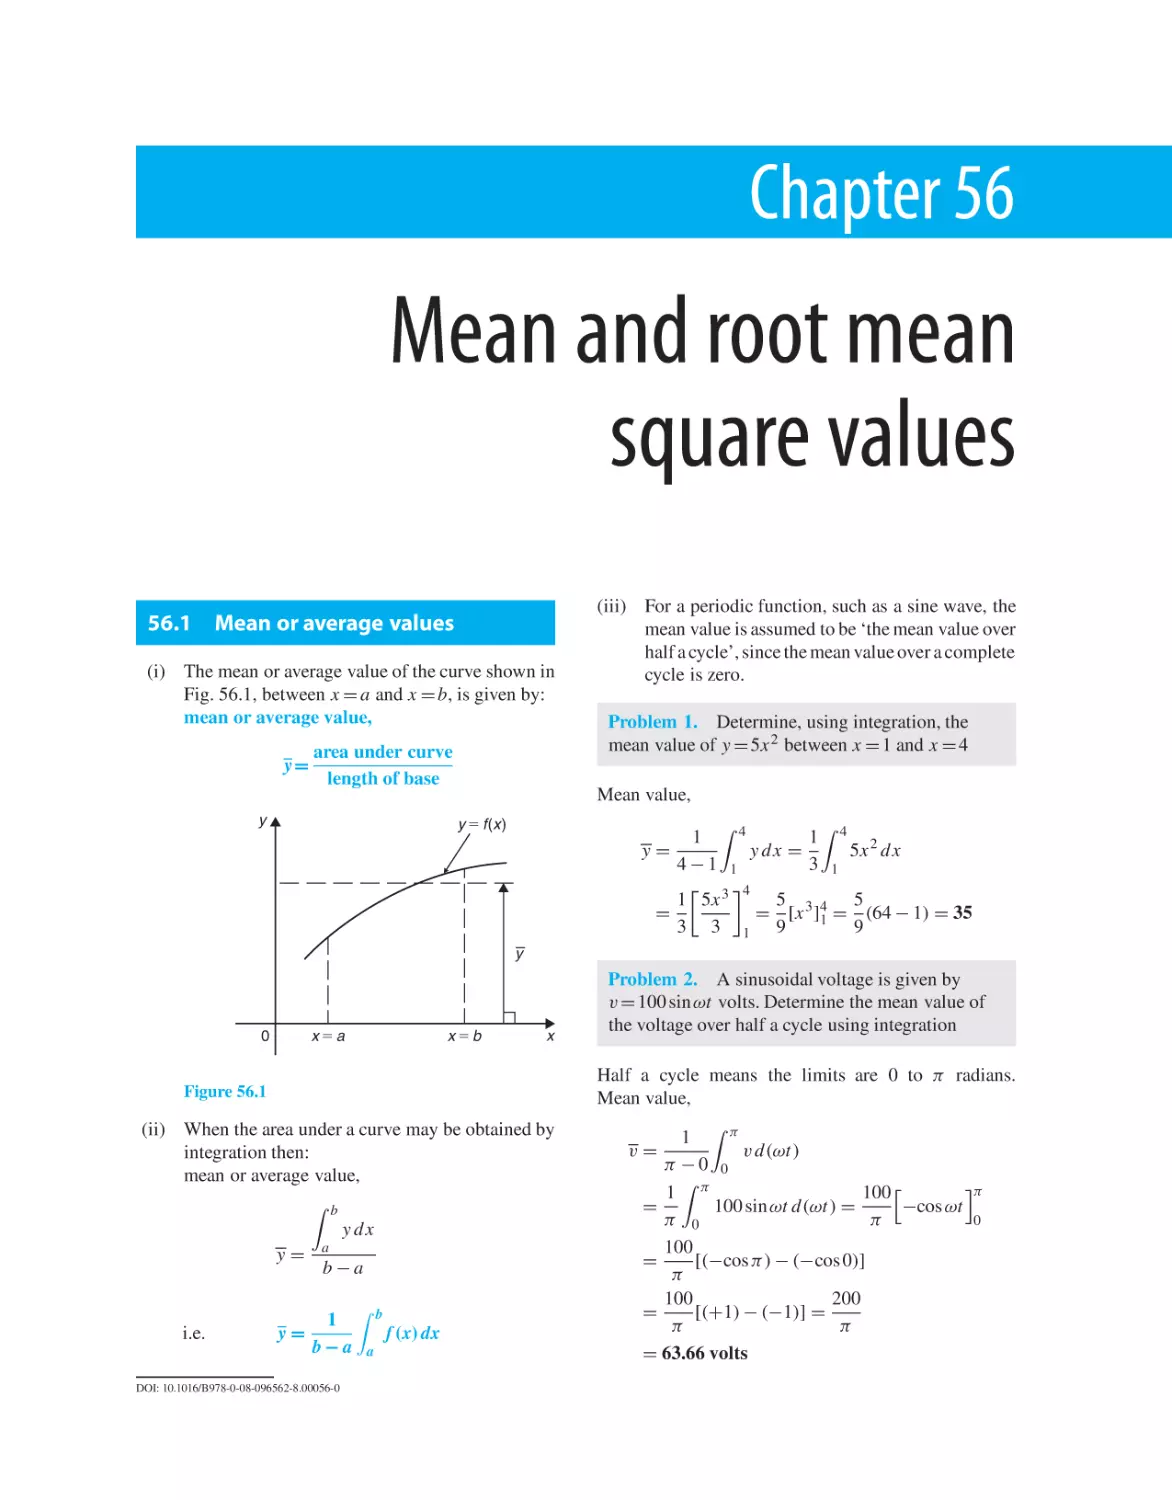 Chapter 56. Mean and root mean square values
56.1 Mean or average values